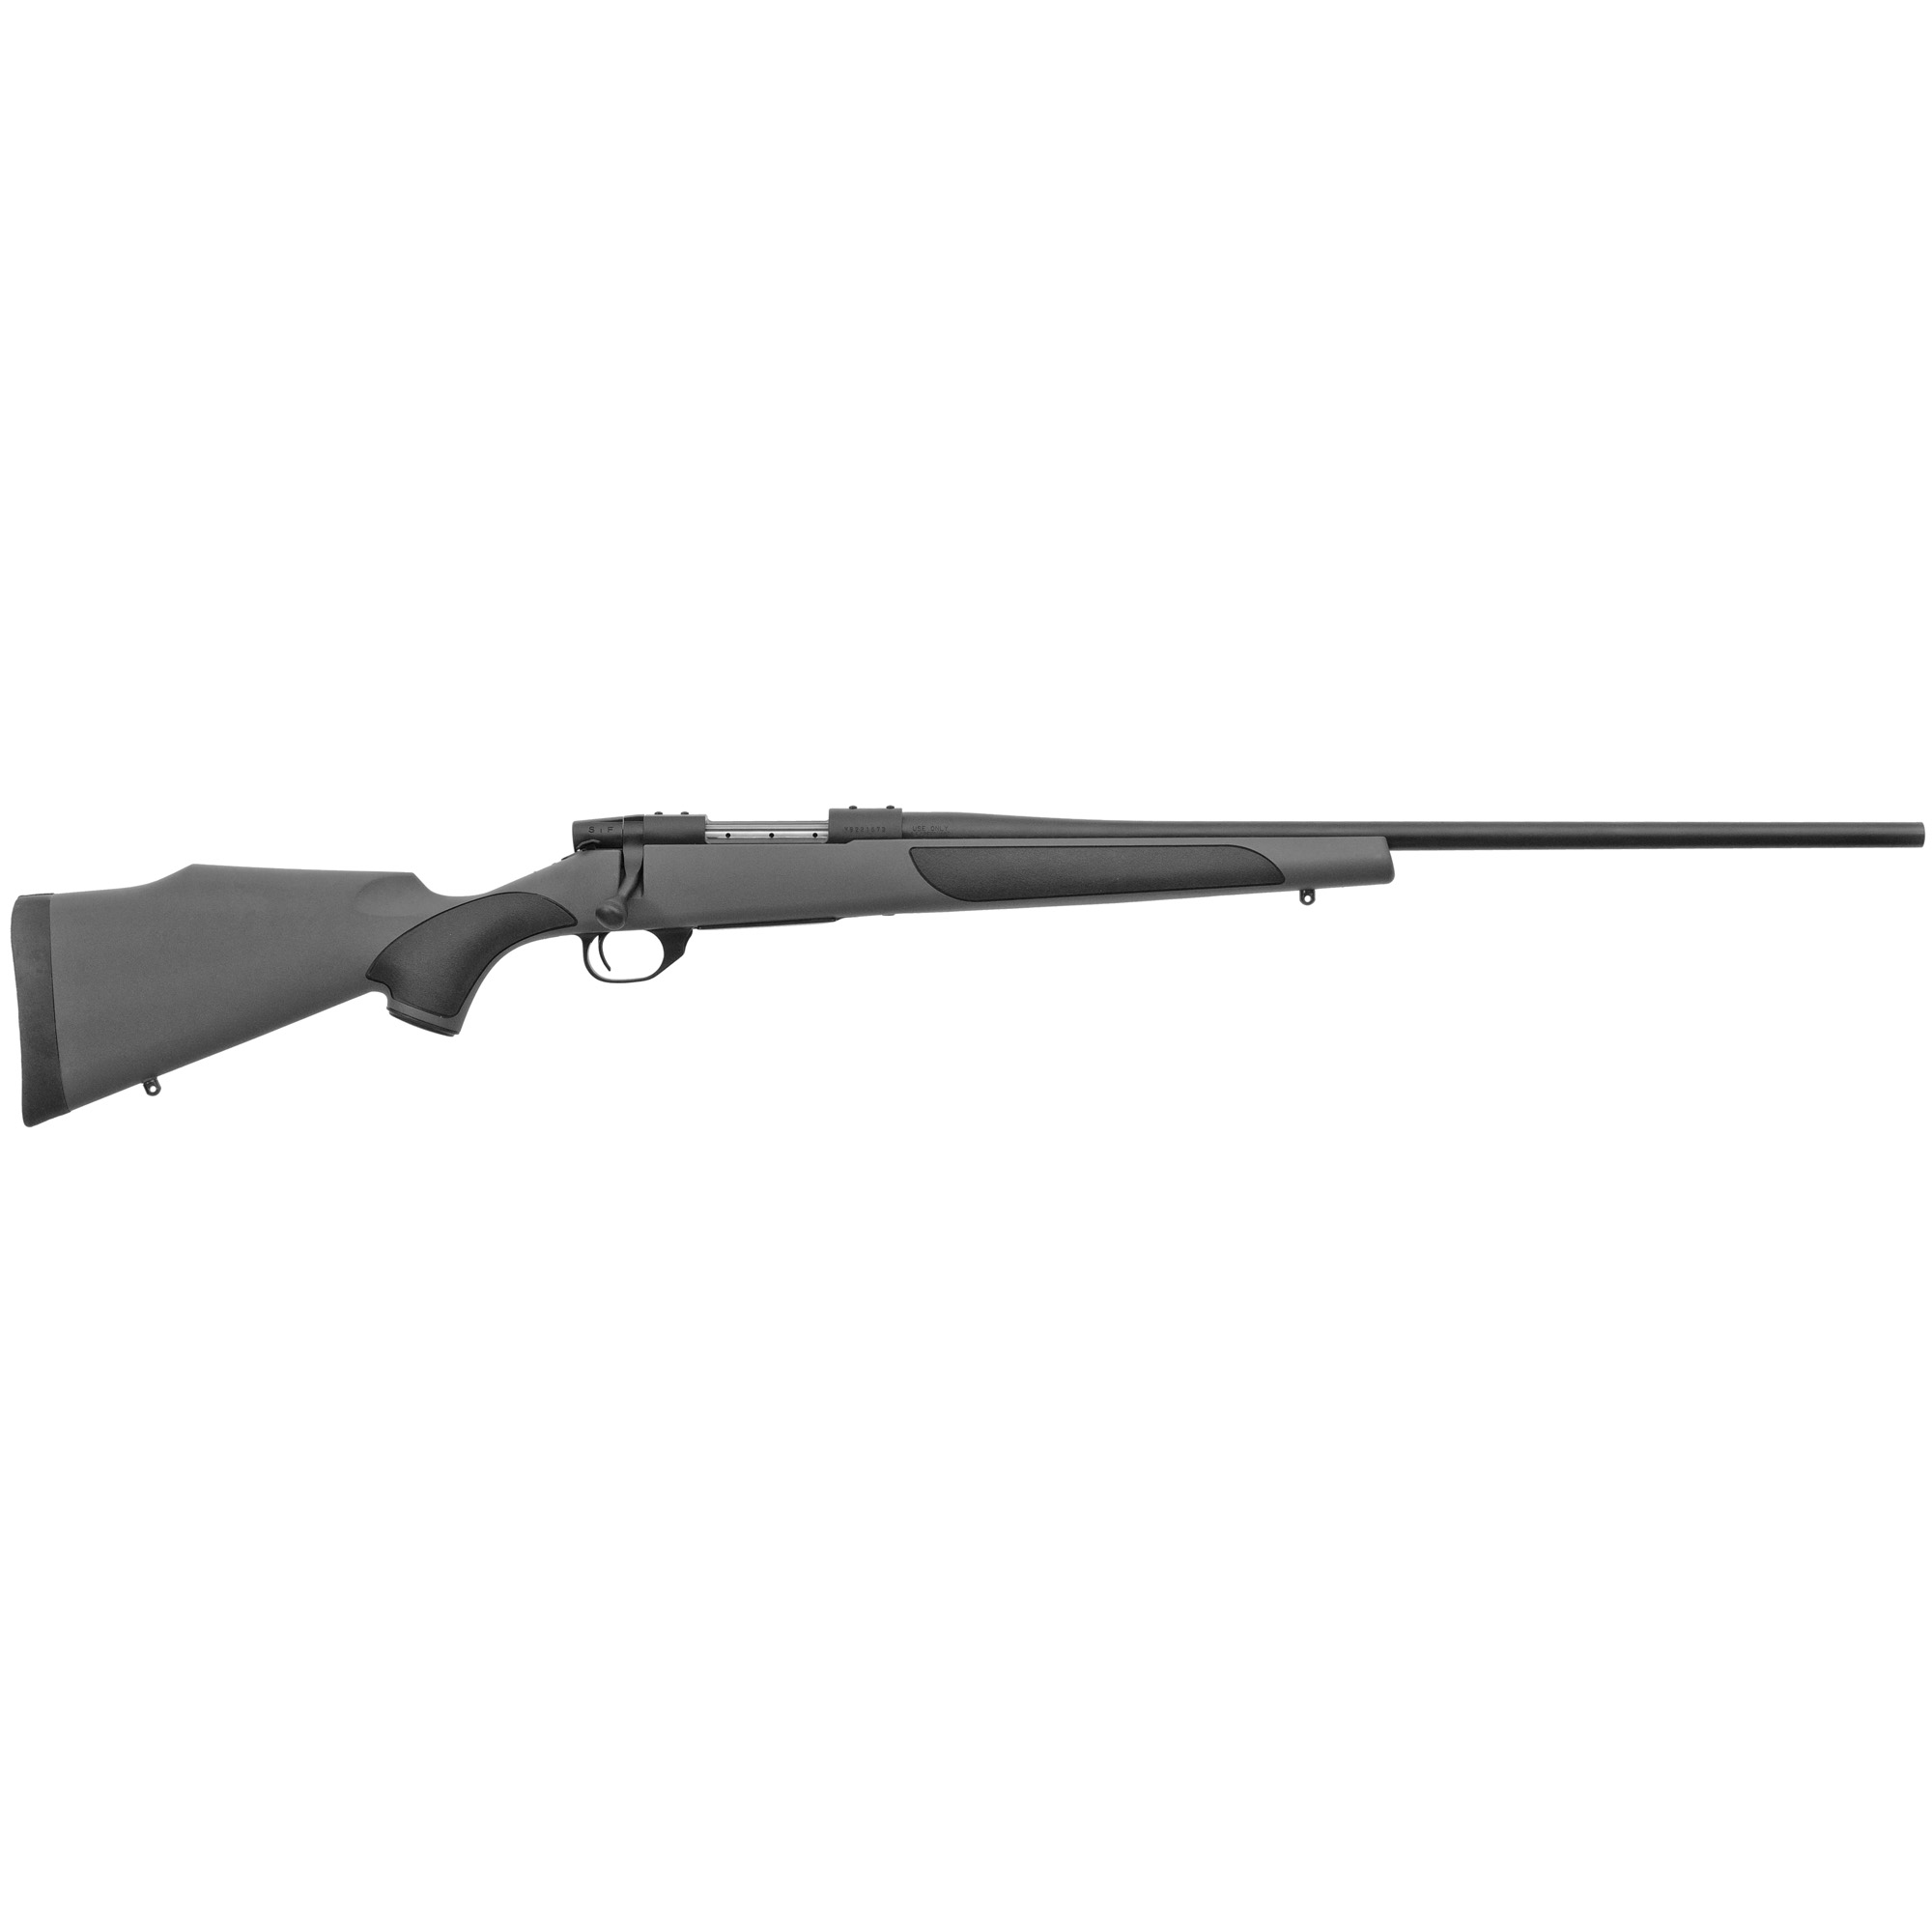 Weatherby, Vanguard Synthetic, Bolt Action, 6.5 PRC, 24" Barrel, Gray Synthetic Stock, 4Rd